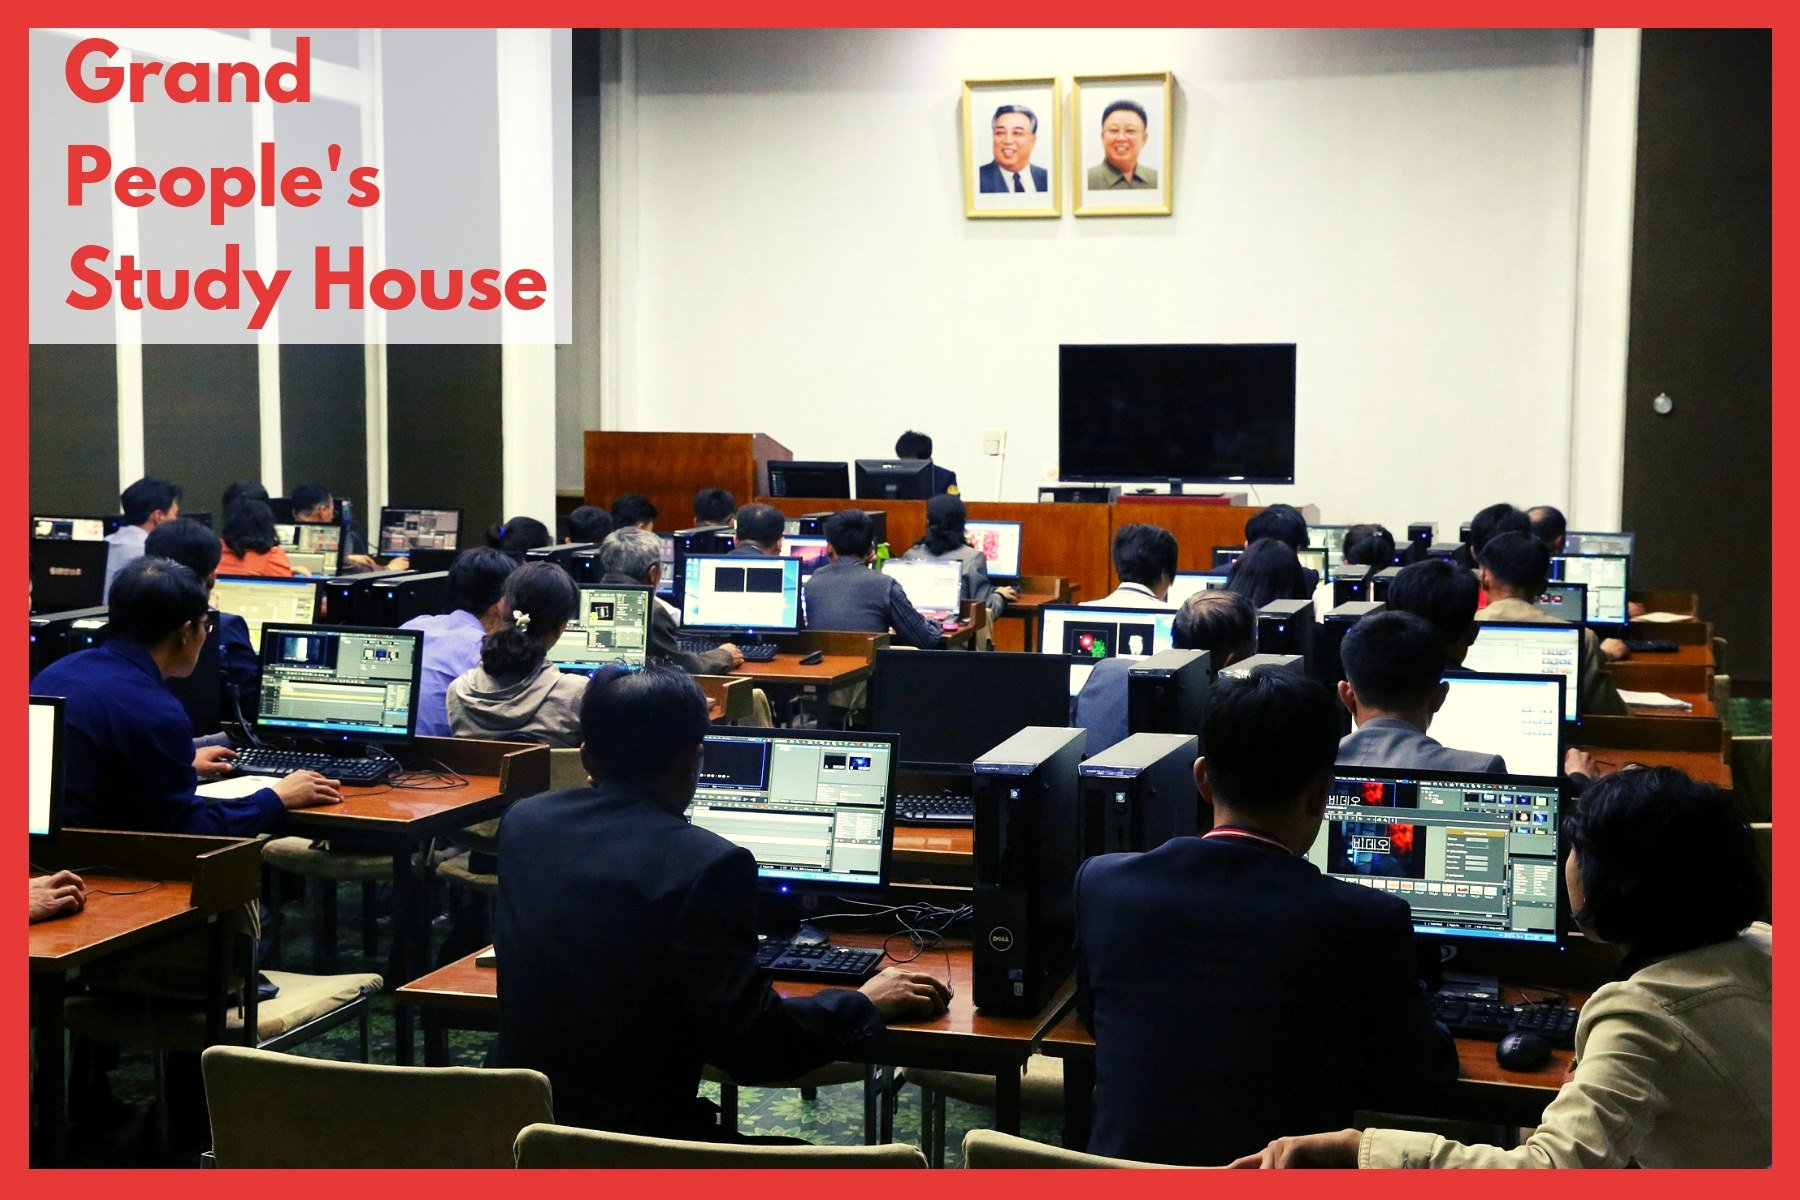 Lesson at the Grand People's Study House in Pyongyang, North Korea. Picture taken by a KTG traveller. The Grand People's Study House is a study centre and library. Lessons and lectures are held here for workers, students, etc